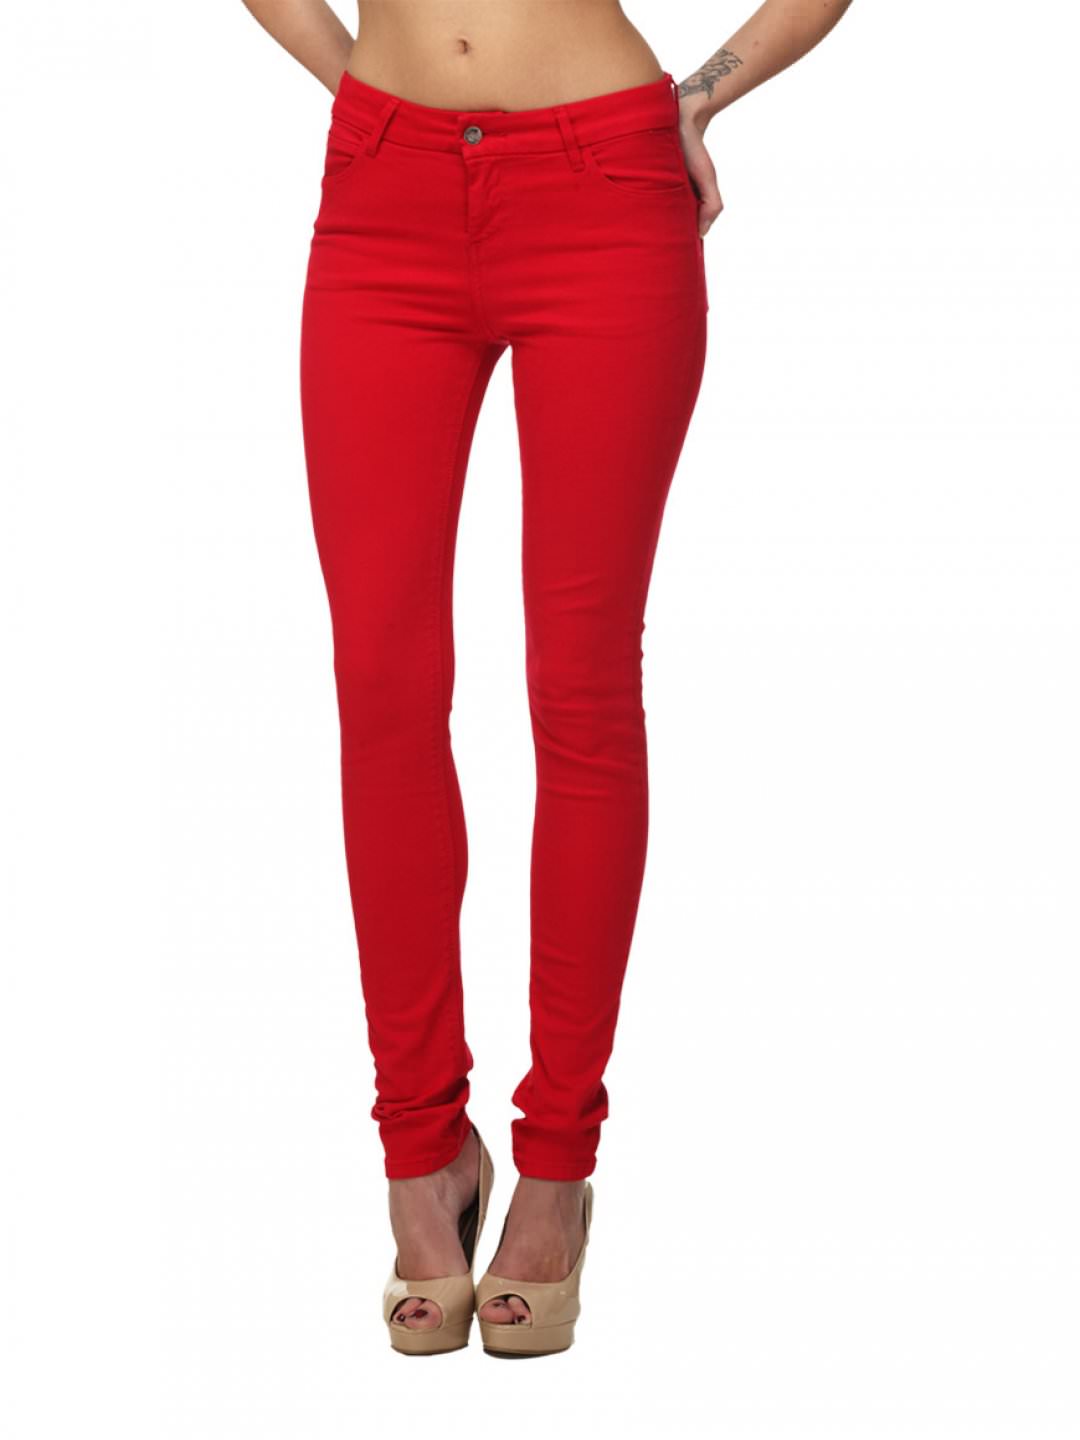 Red Jeans For Women Women Red Jeans Hmcjoxt  